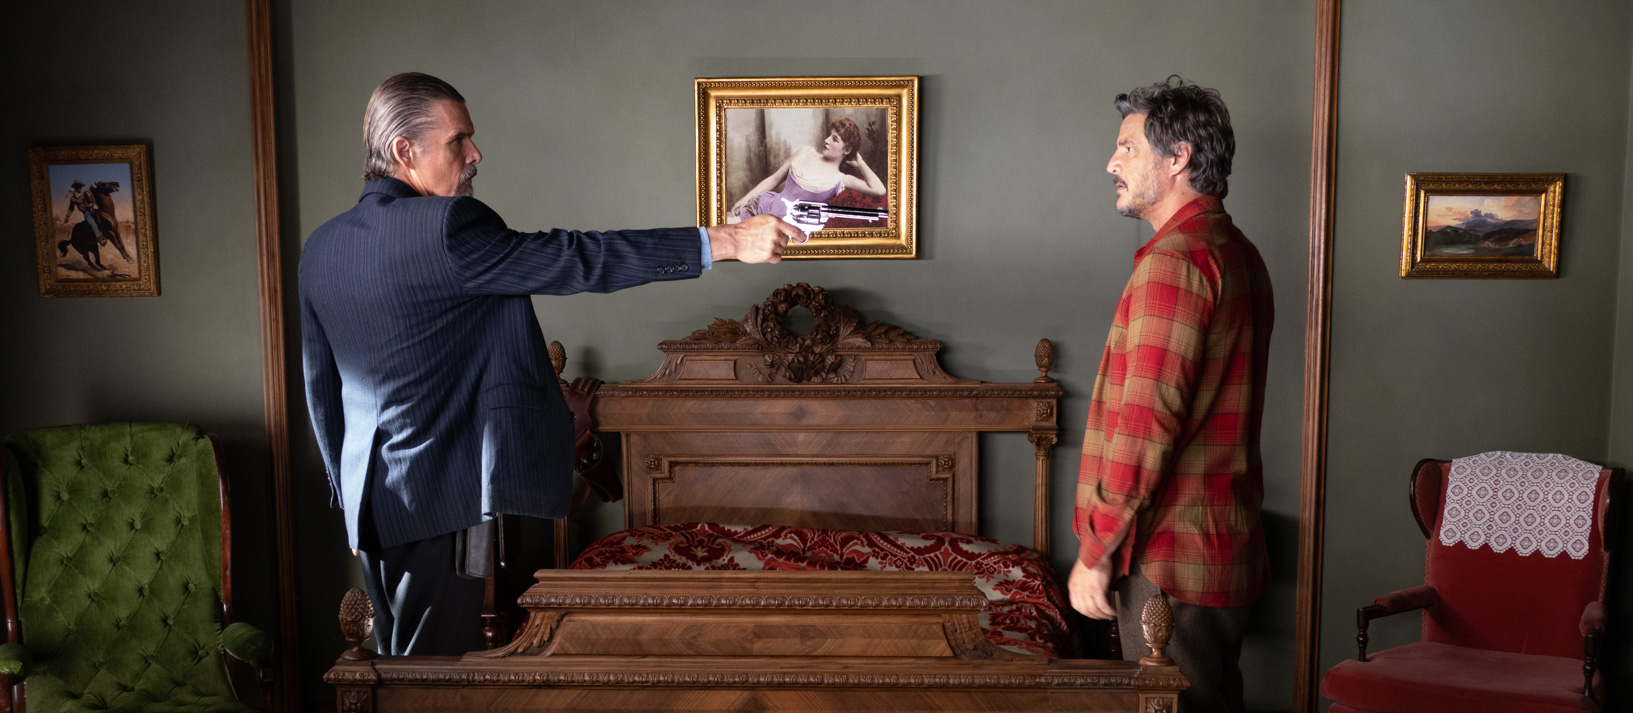 Ethan Hawke pointing a gun at Pedro Pascal in a rustic bedroom.